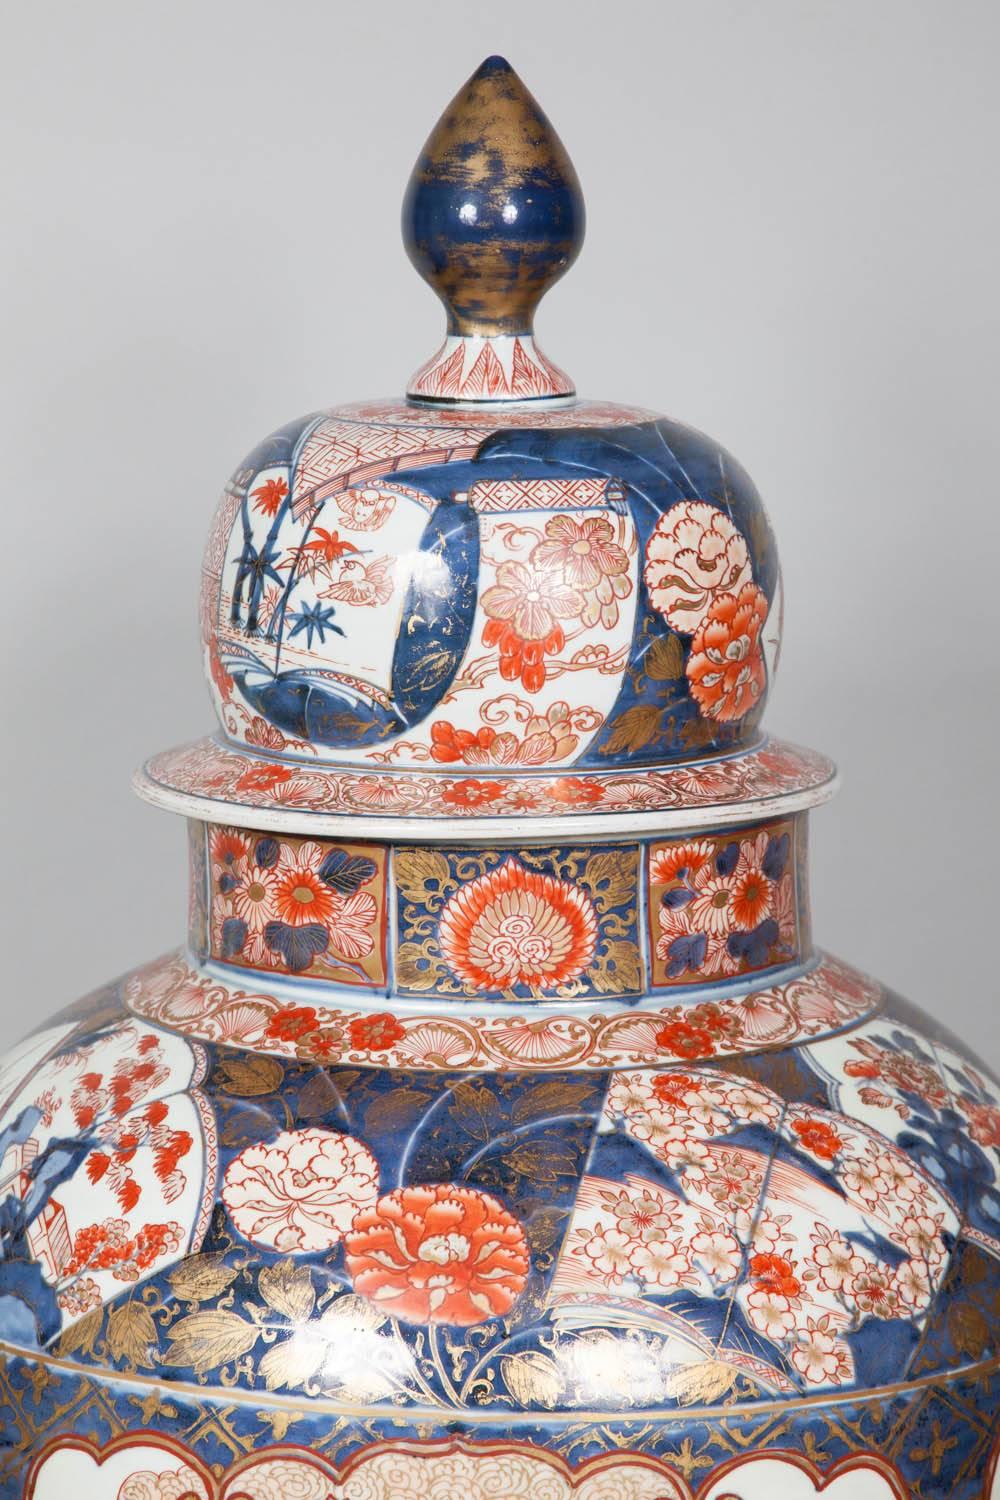 An extremely impressive and large Japanese Imari vase, late 17th-early 18th century. 
Four panels depicting court scenes with pagodas, particularly fine decoration. The main body of the vase is decorated in iron red and cobalt blue and gilt on